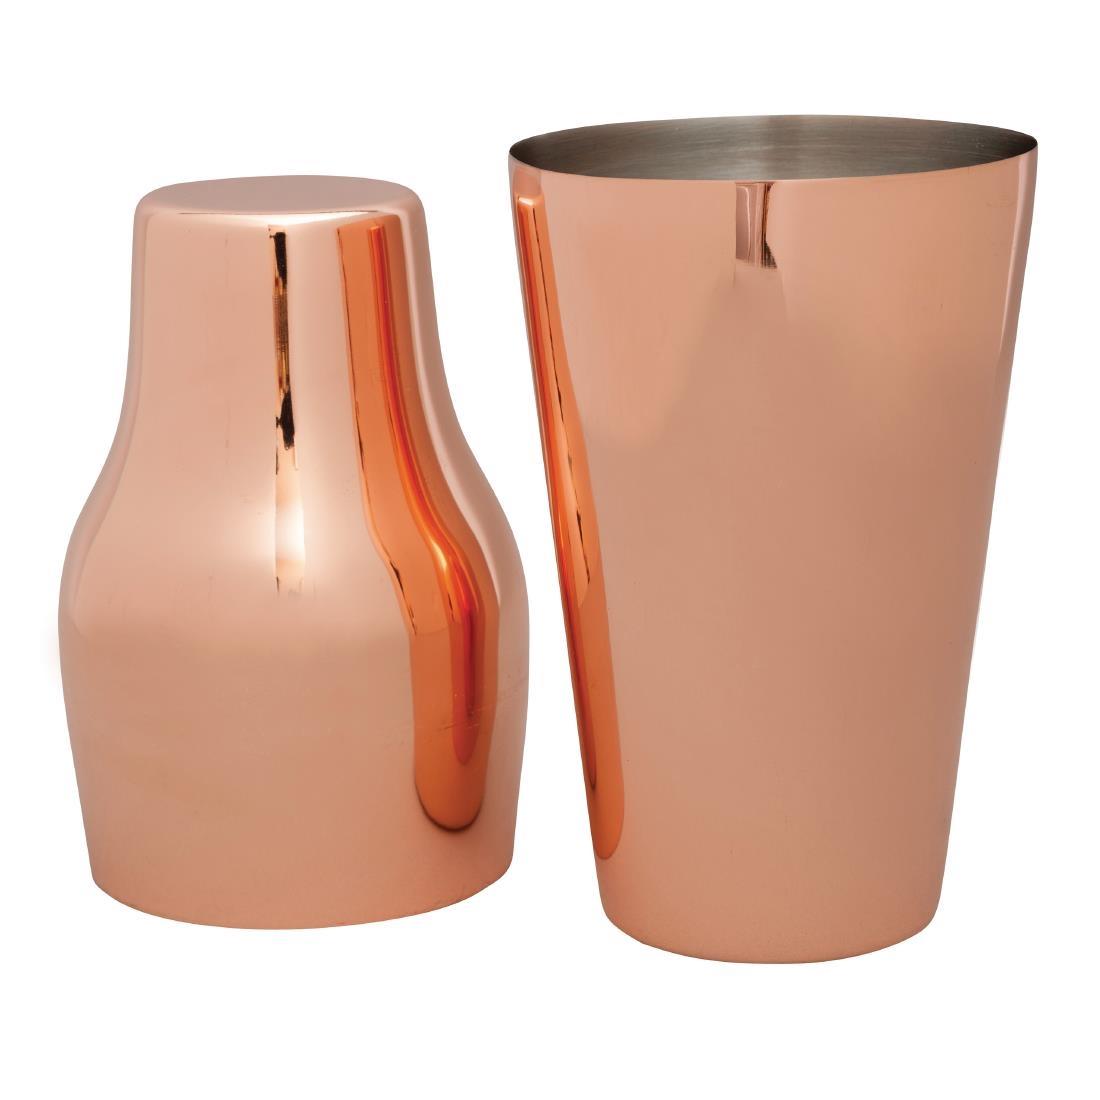 Beaumont French Cocktail Shaker Copper - GK959  - 2